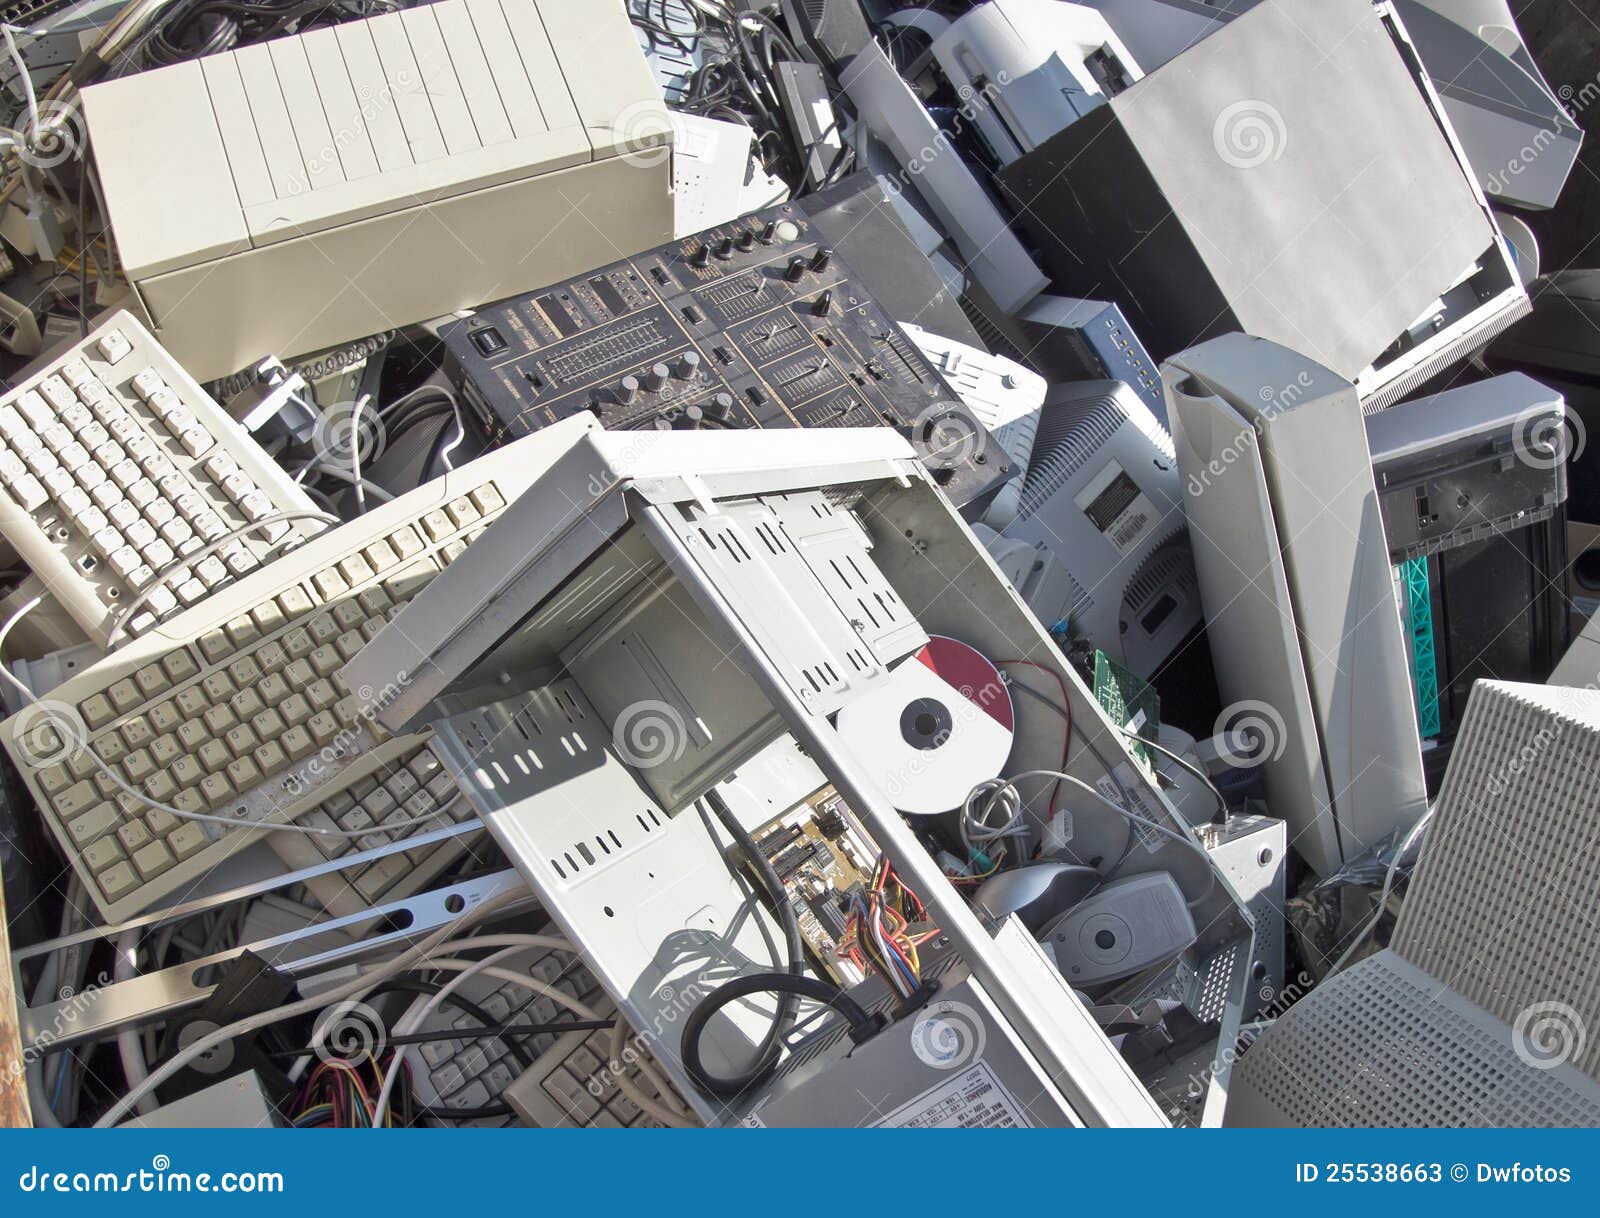 448 Scrap Computer Parts Stock Photos - Free & Royalty-Free Stock Photos  from Dreamstime